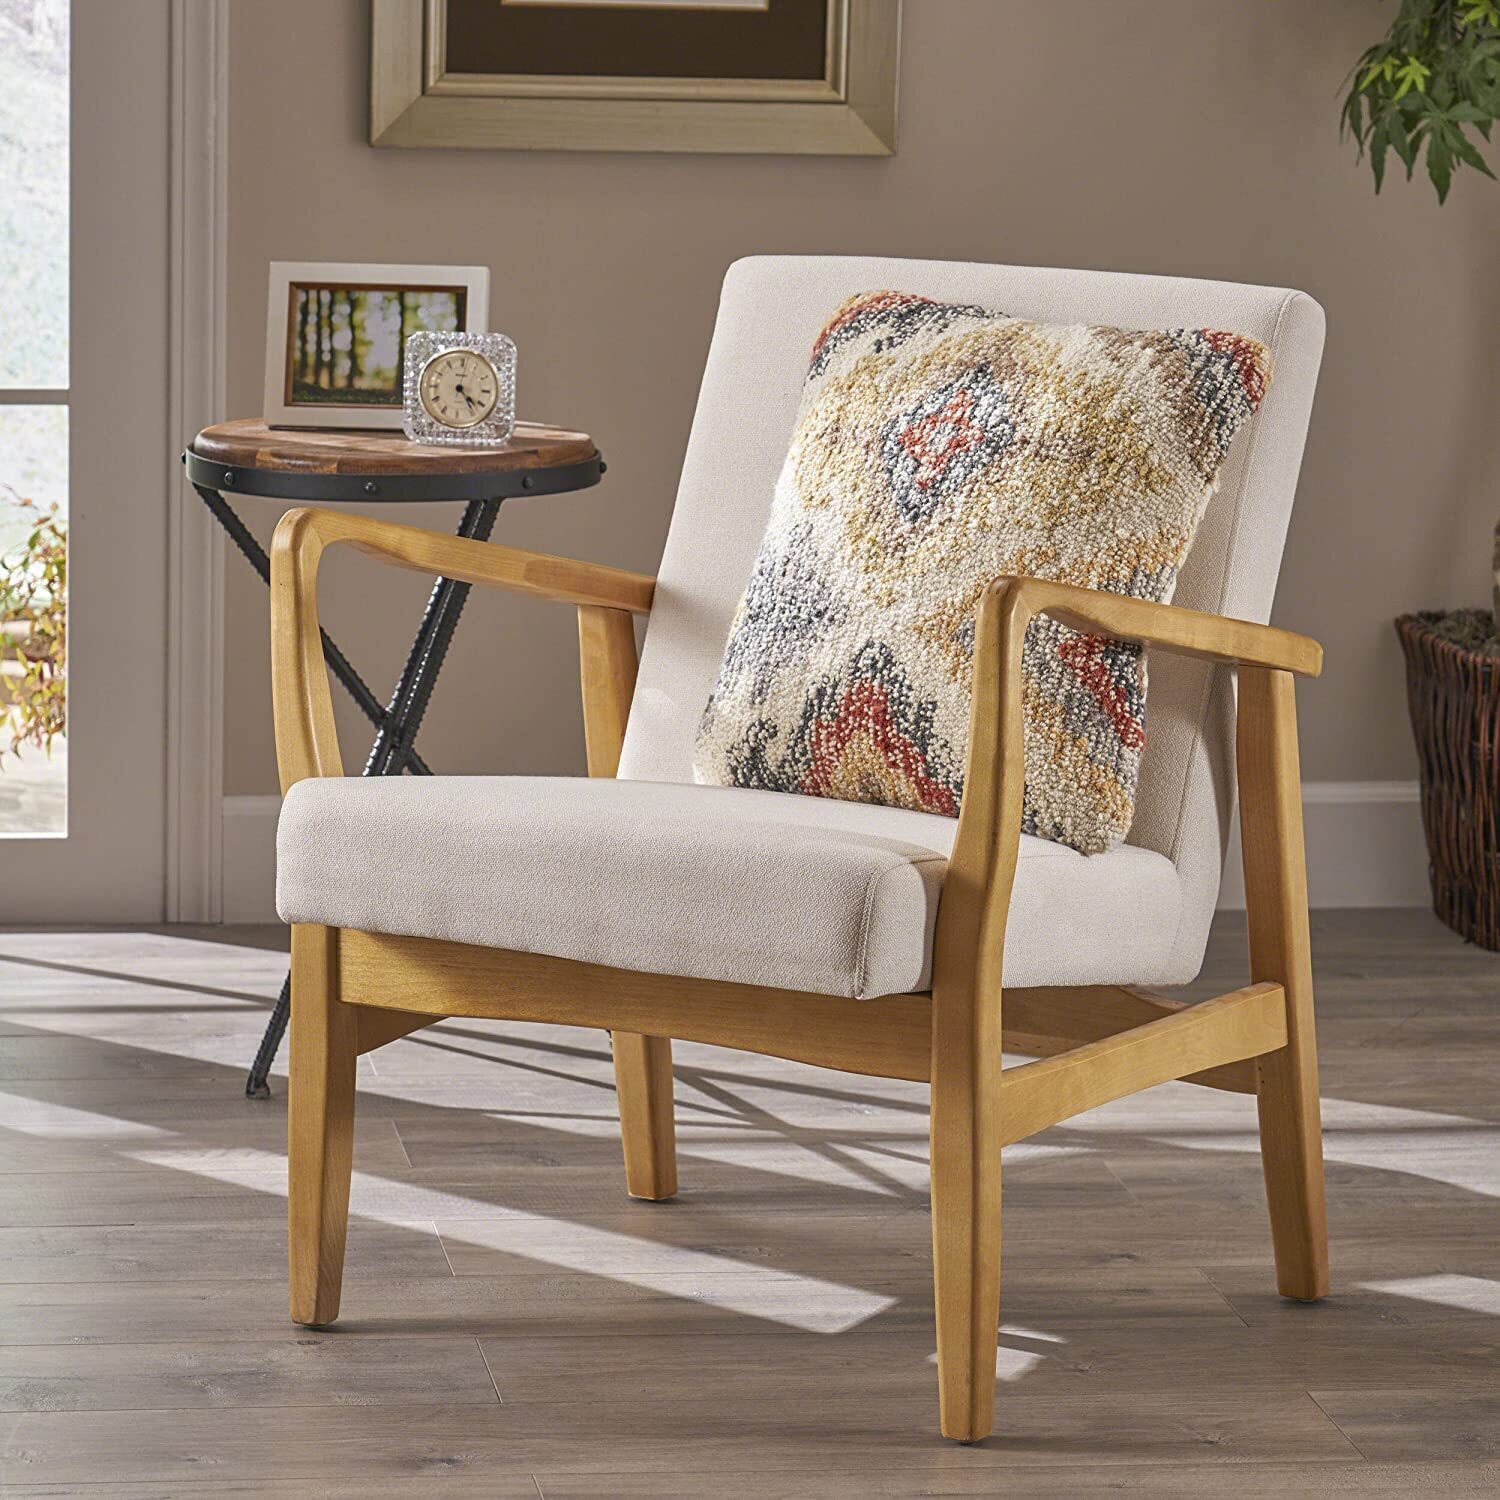 Cream and Wood Japandi Dining Chair